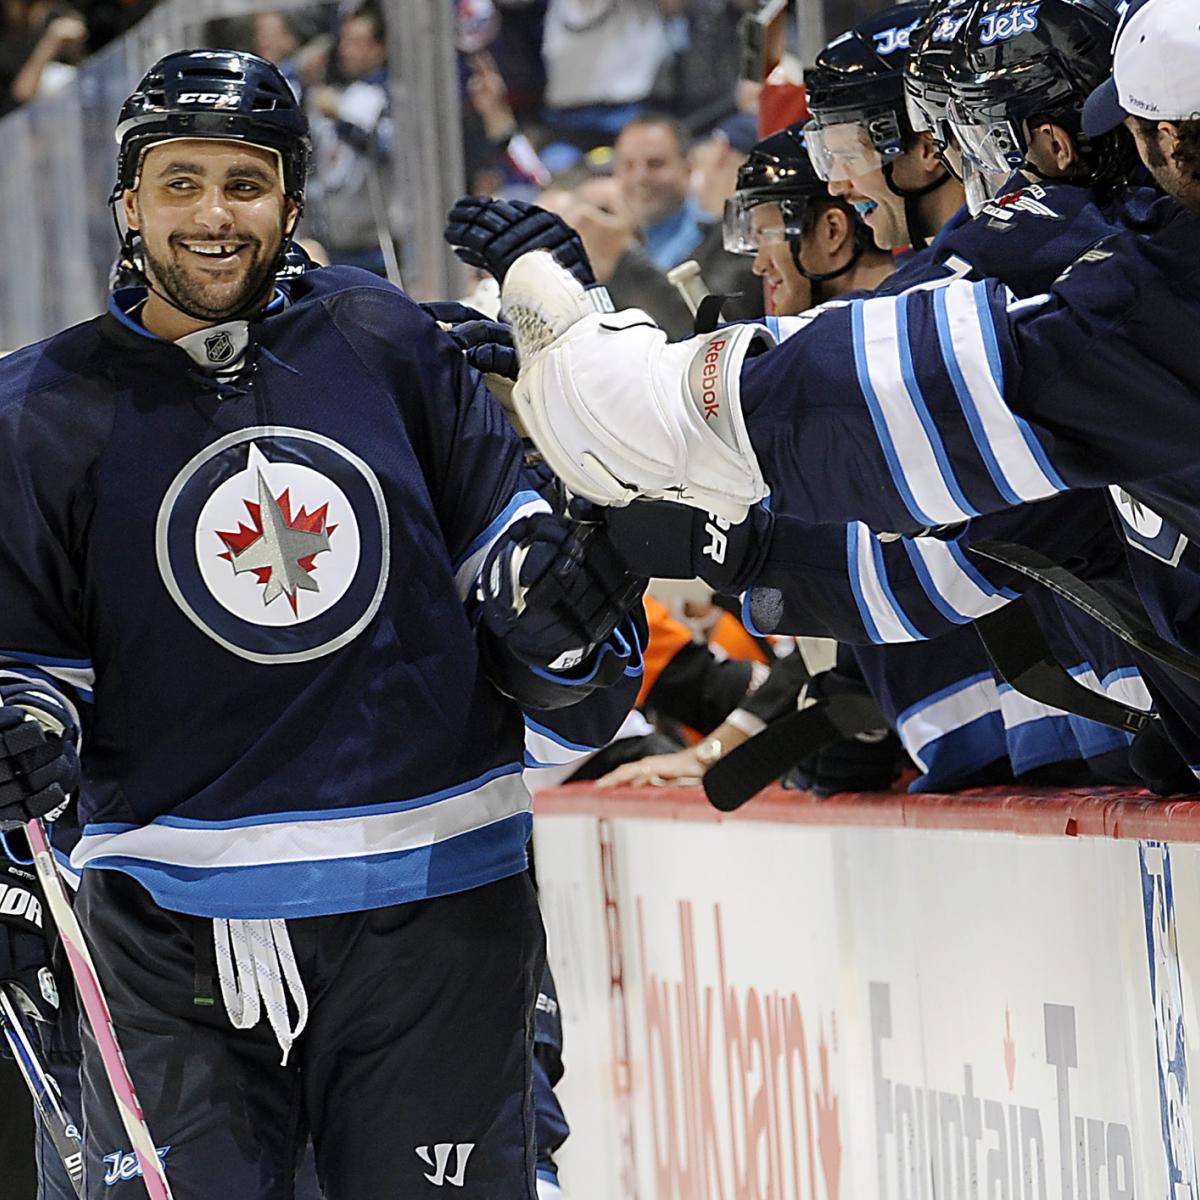 Dustin Byfuglien staying with Jets - Sports Illustrated